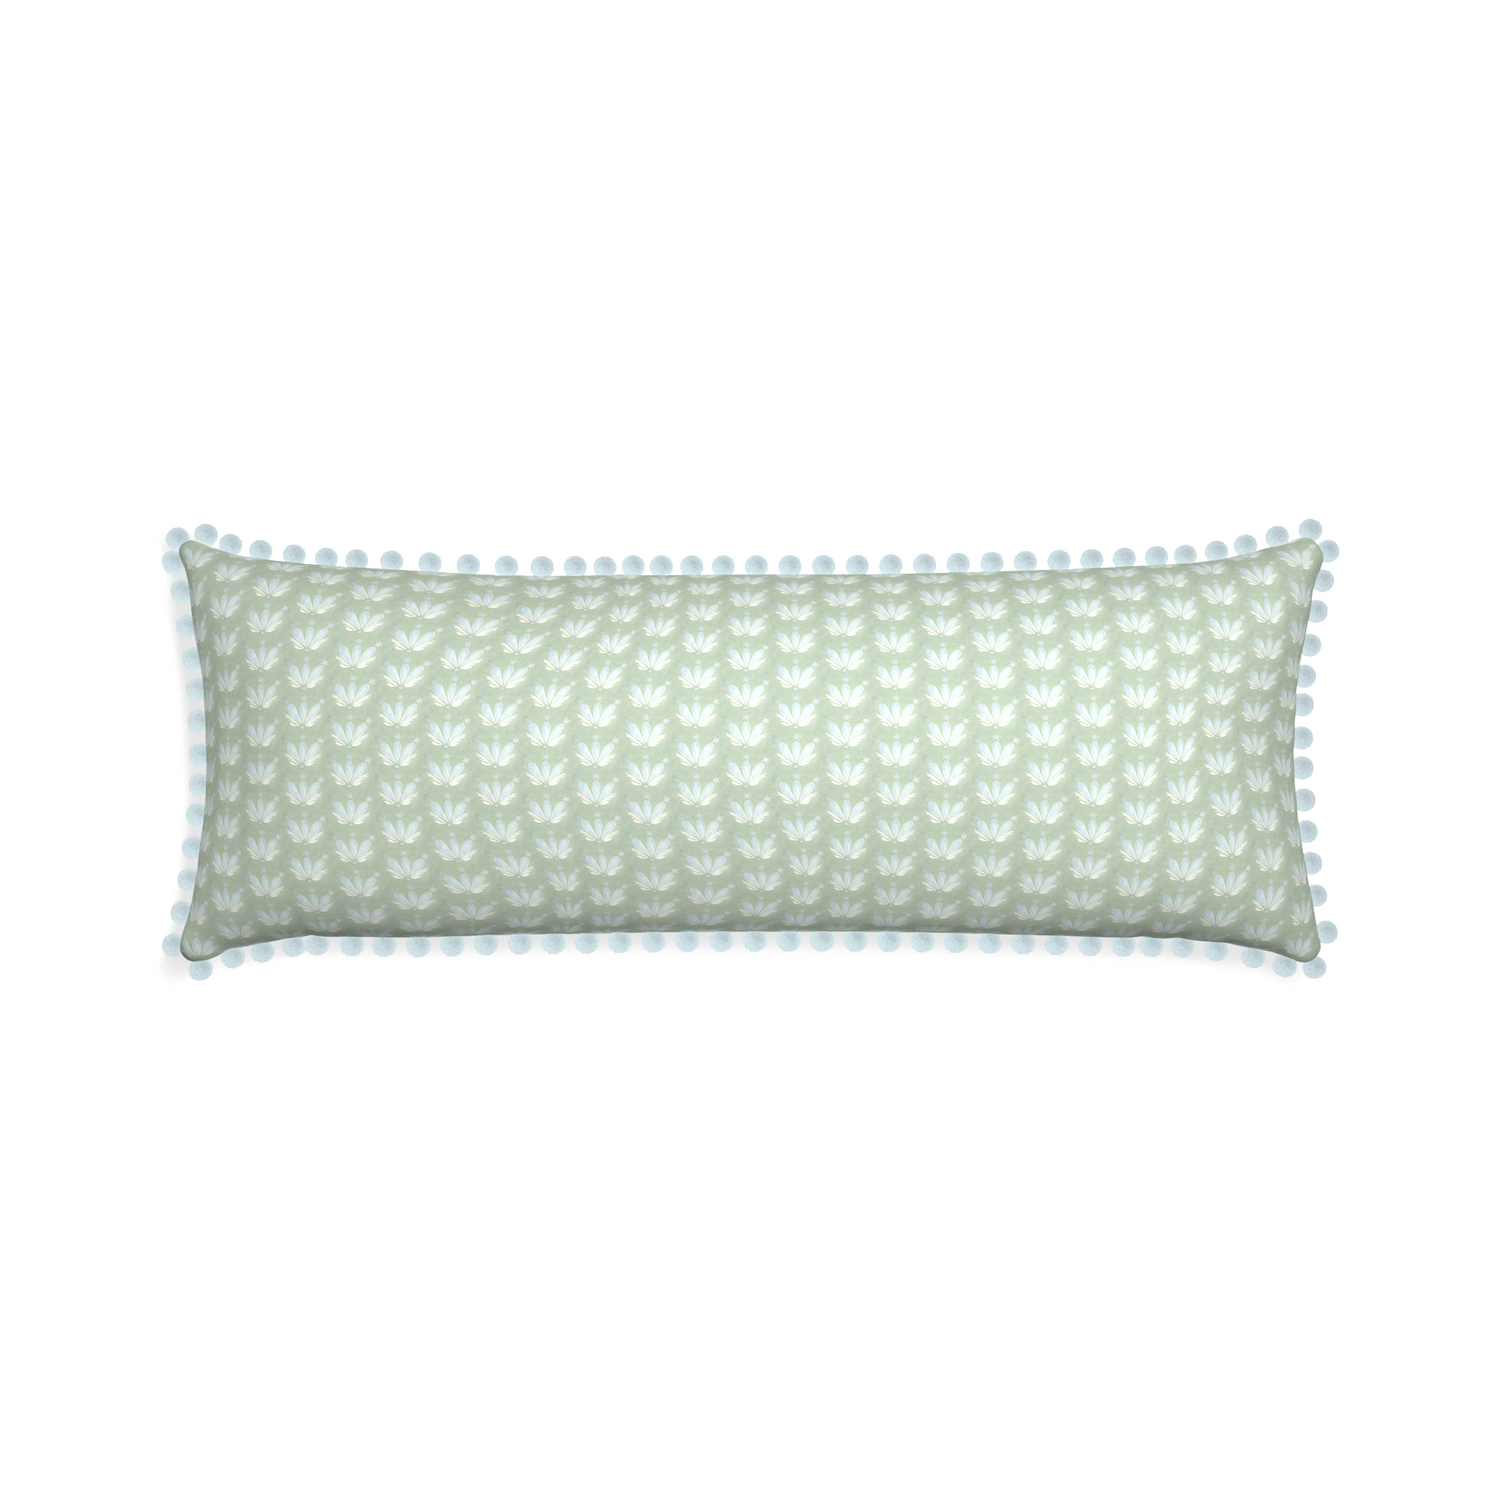 Xl-lumbar serena sea salt custom blue & green floral drop repeatpillow with powder pom pom on white background